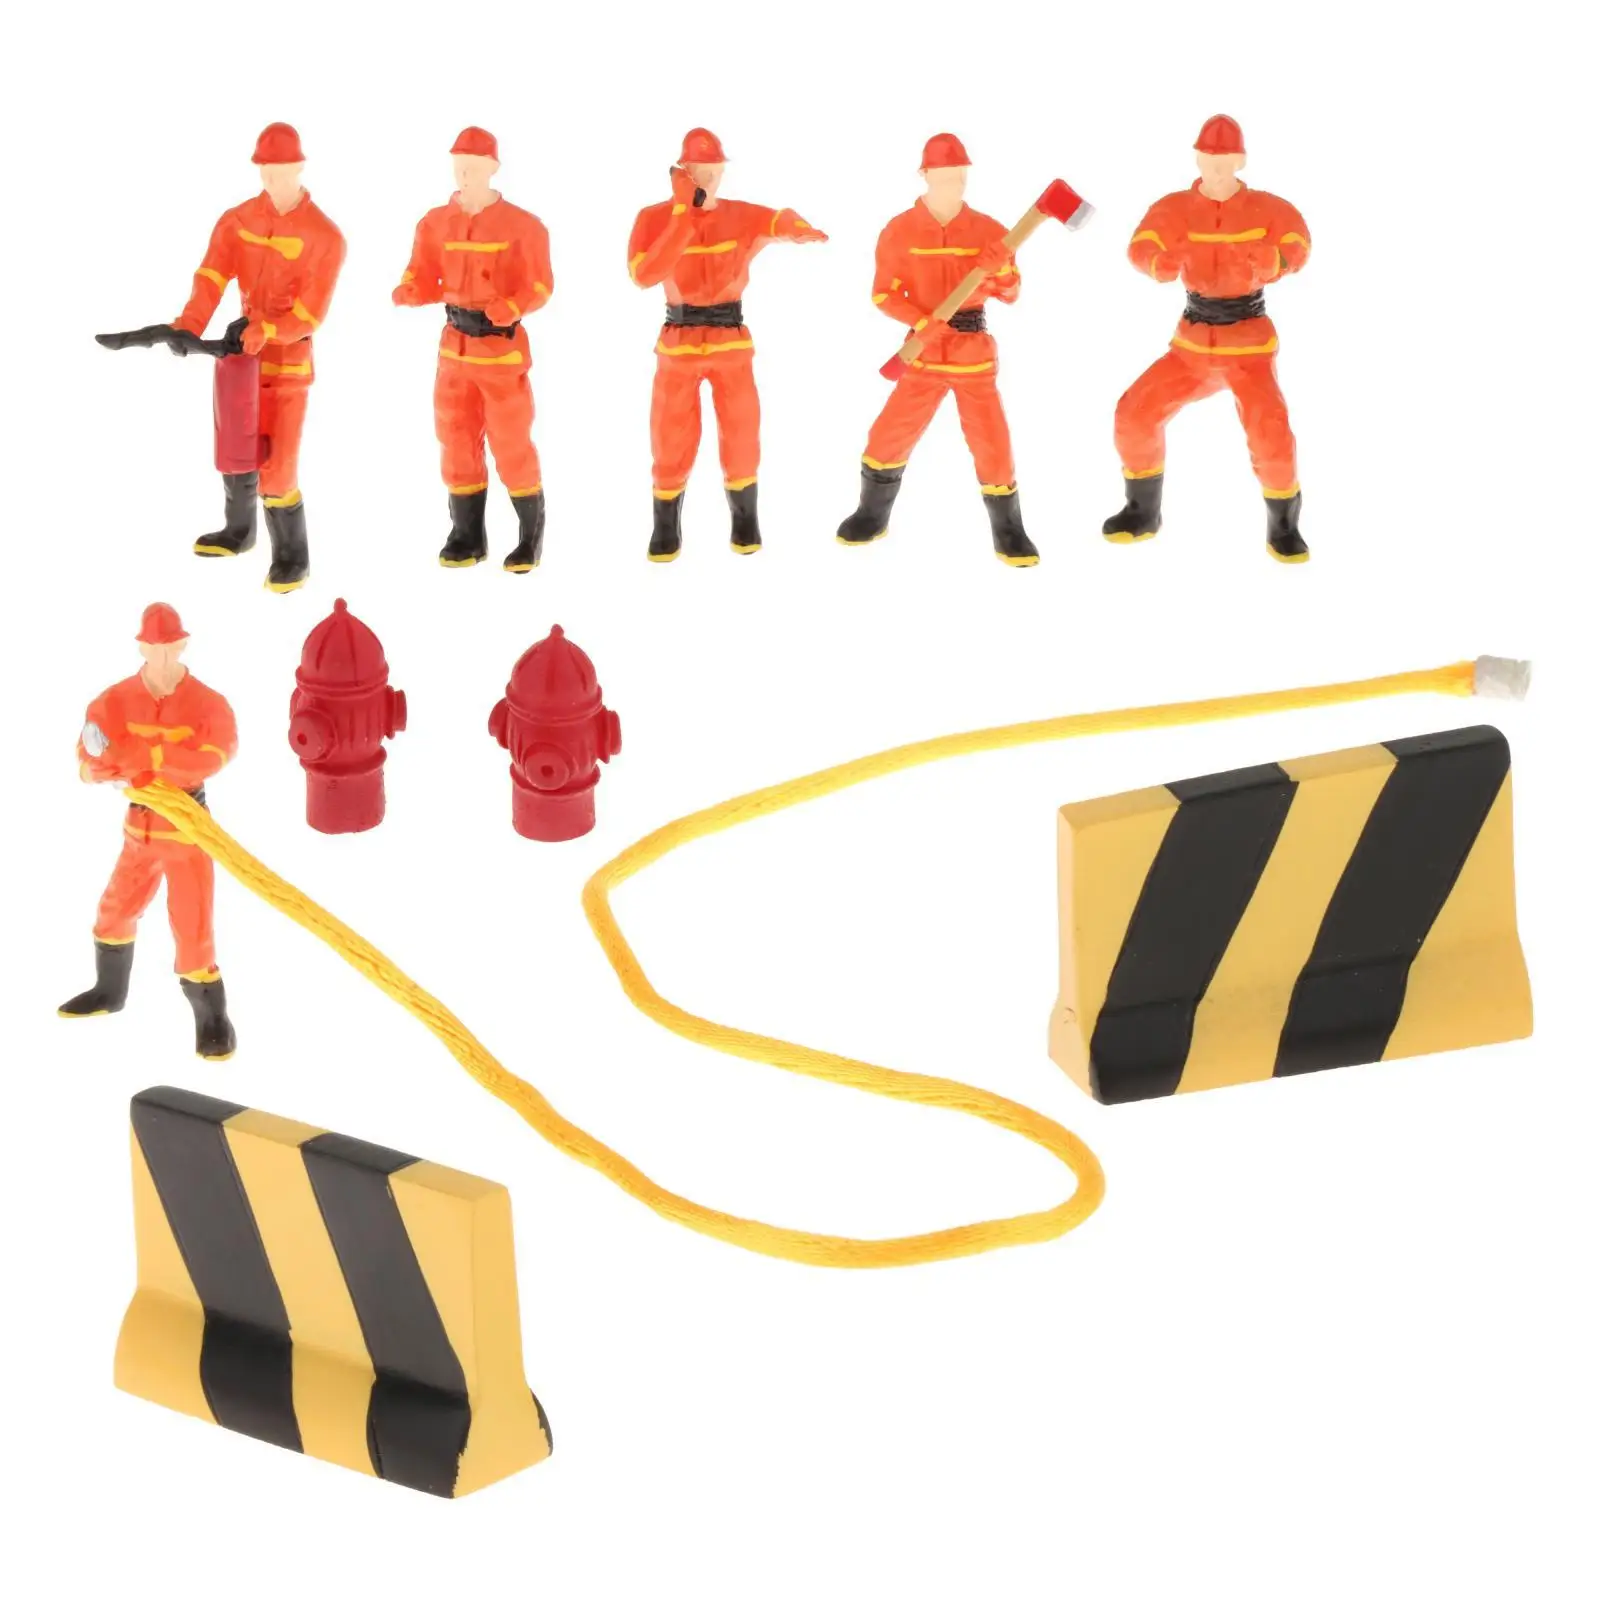 1:50 Scale Resin Simulation Firefighter Scene for Trains Scene DIY Projects